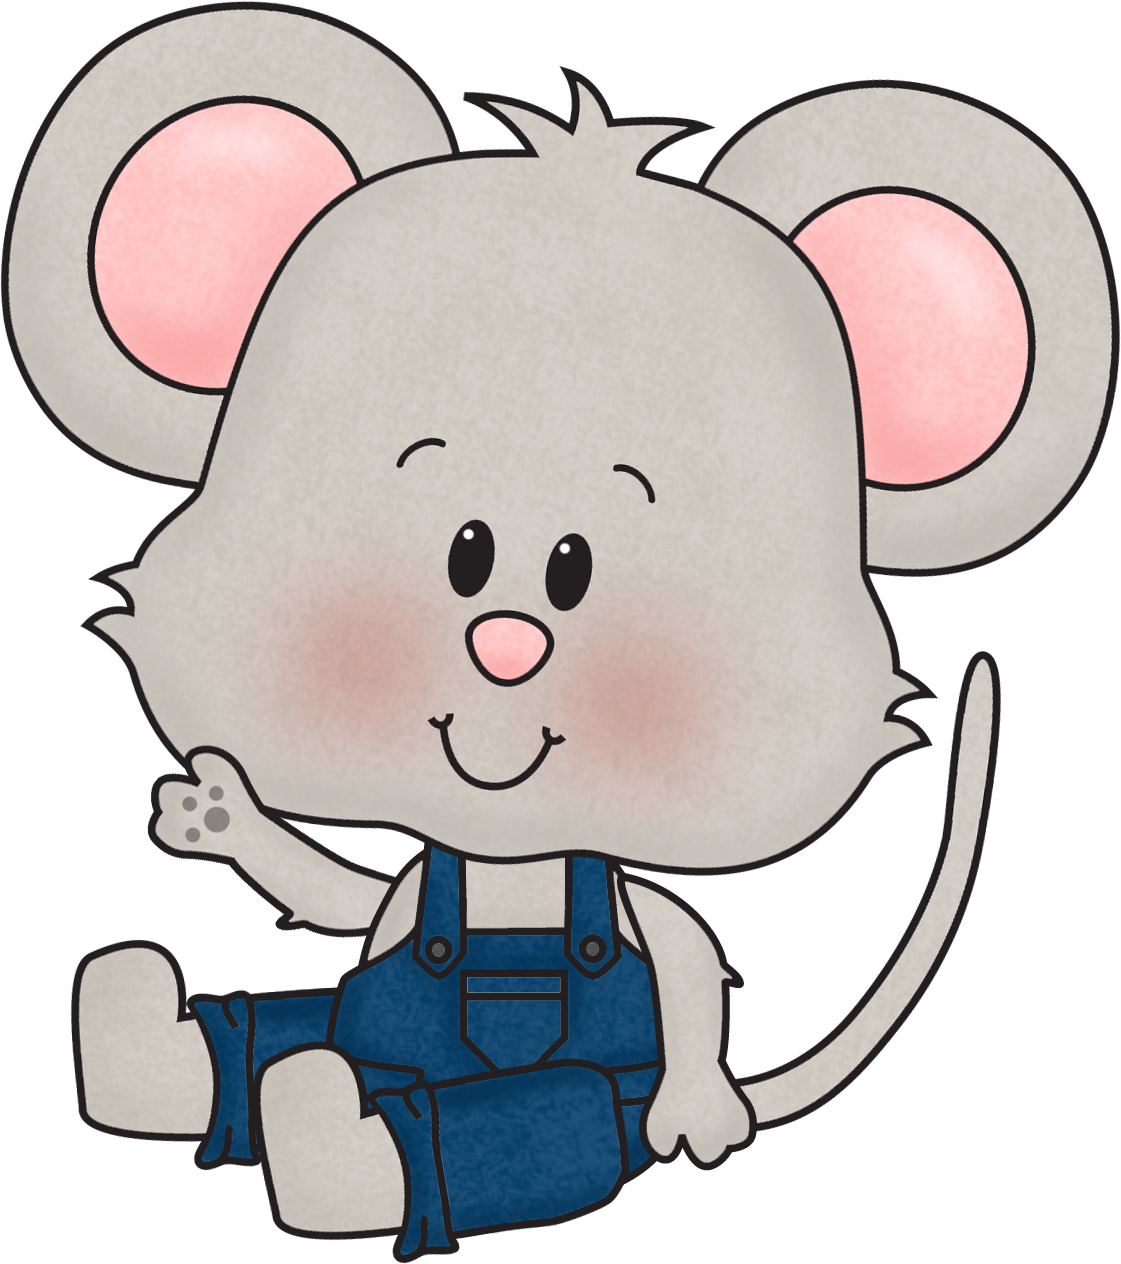 clipart of a mouse - photo #37